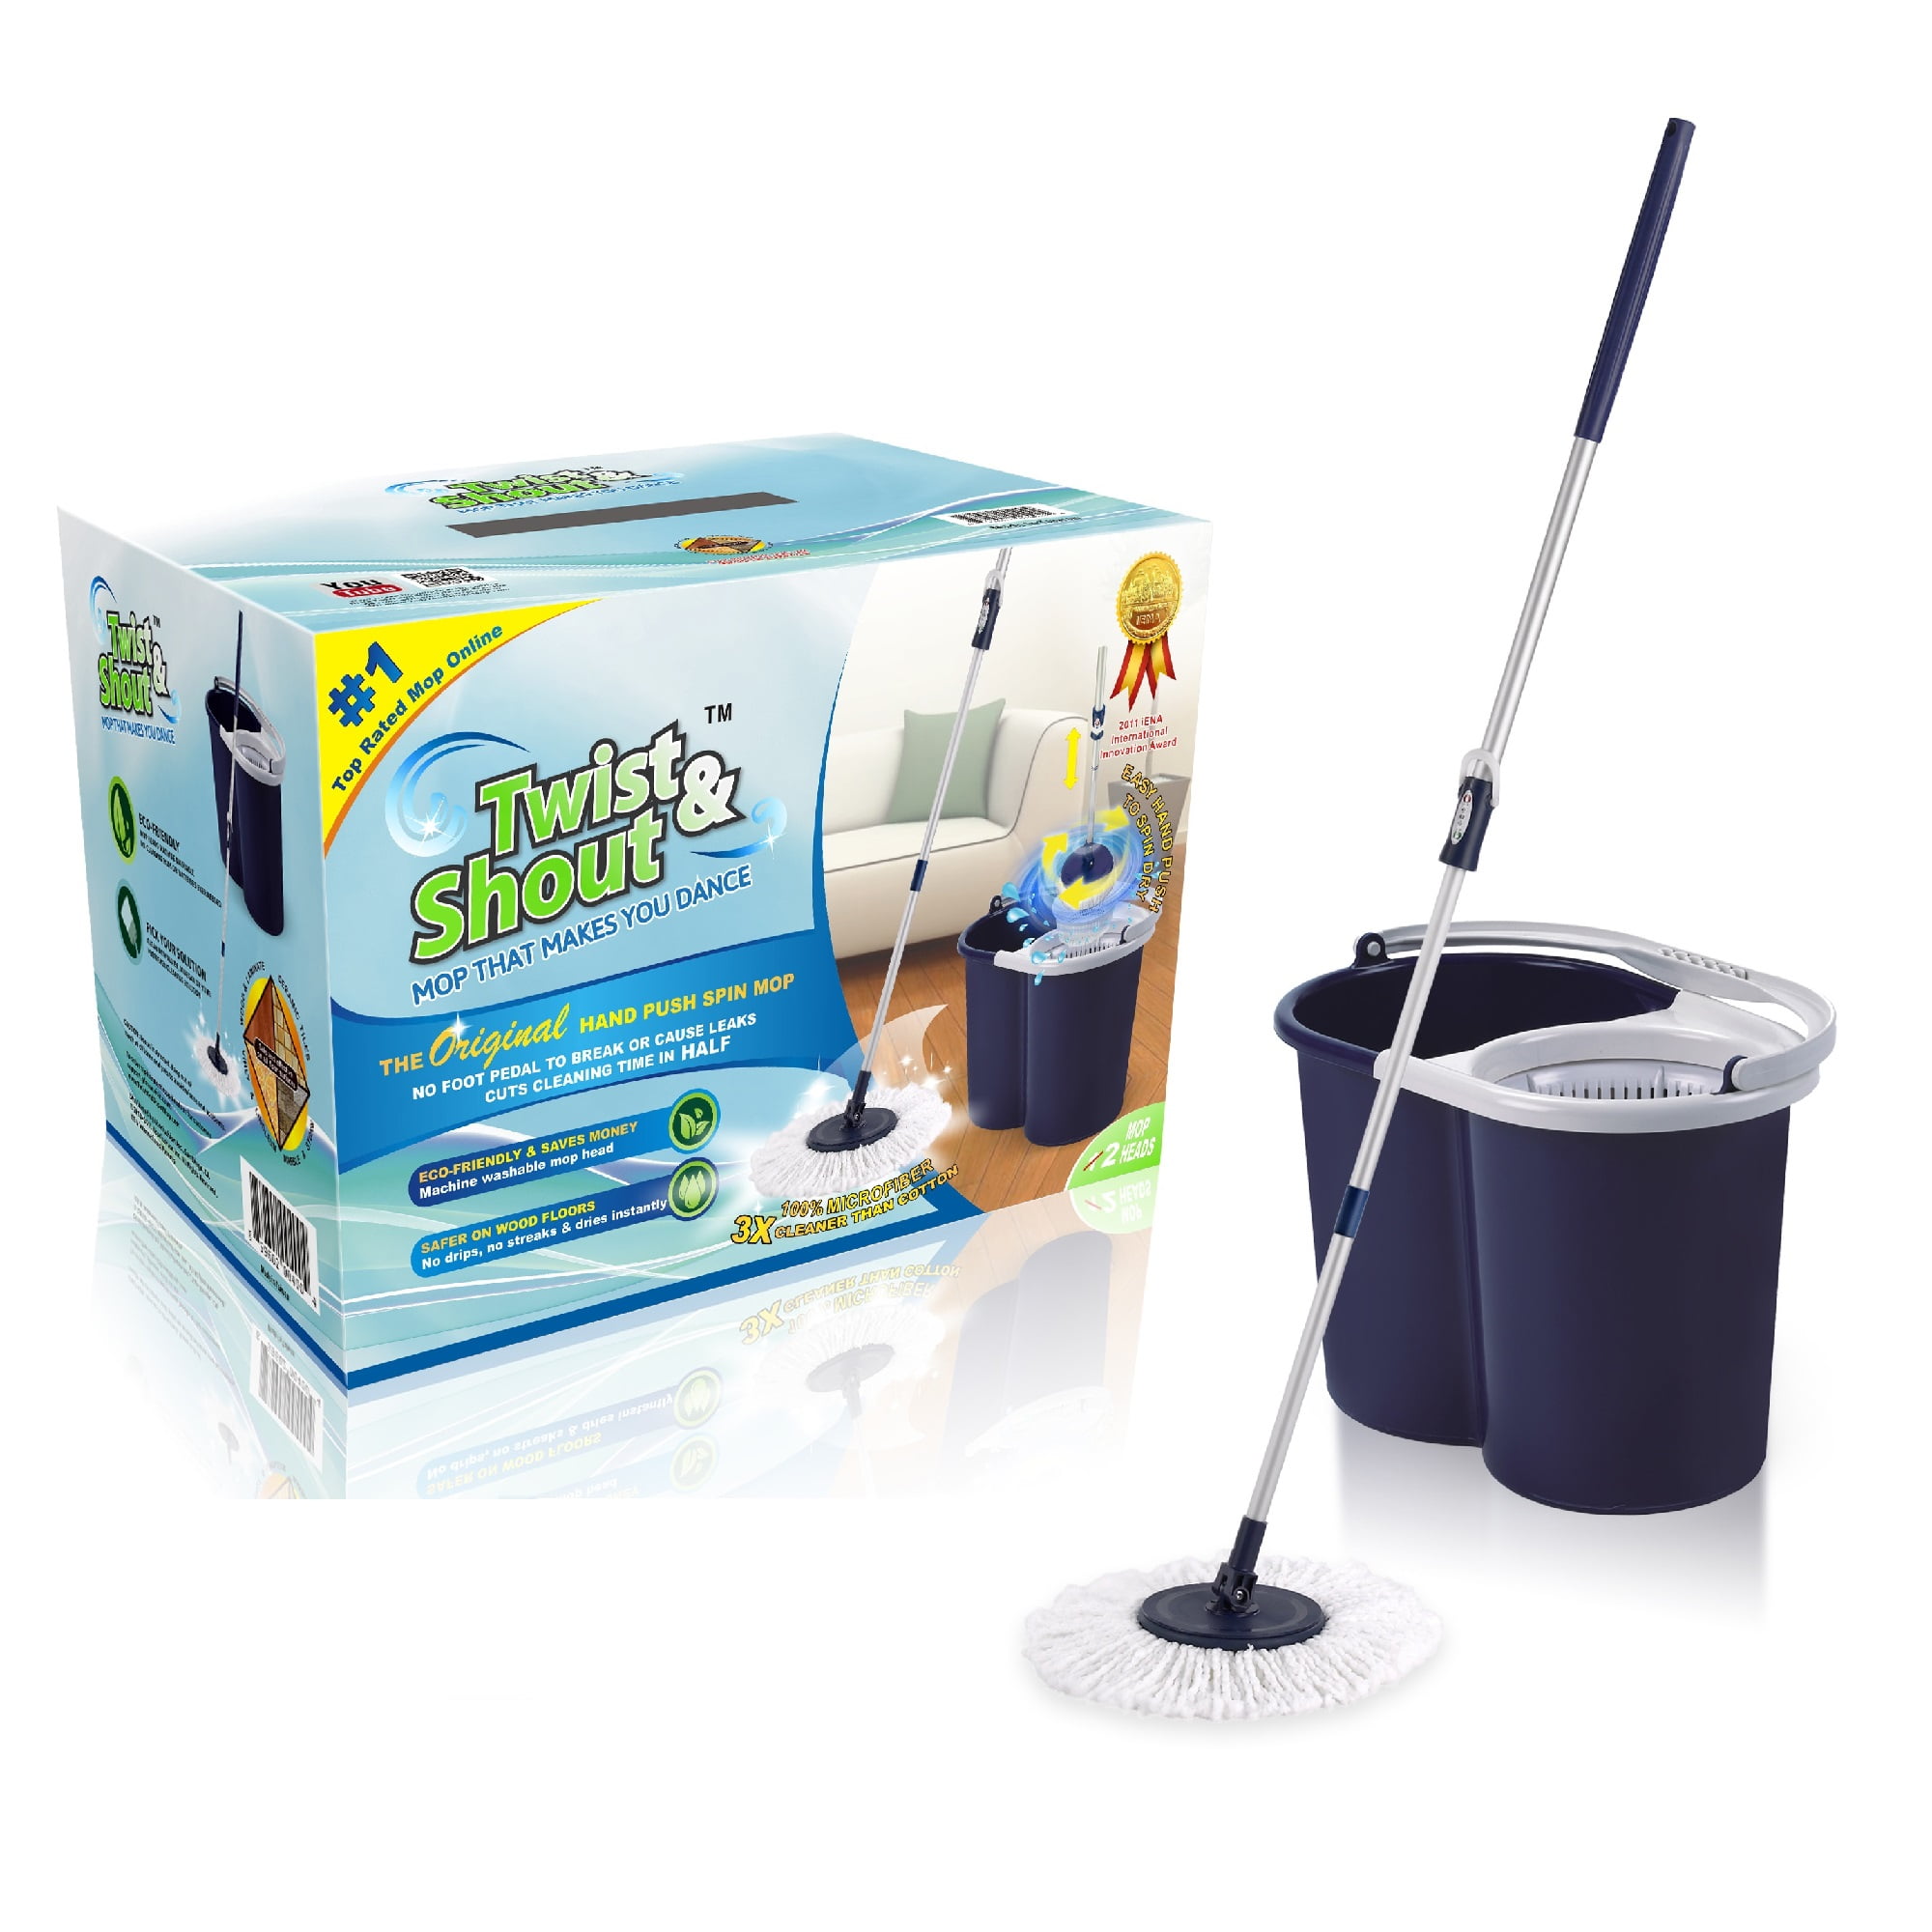 Twist and Shout Mop - Award Winning Hand Push Spin Mop from the Original  Inventor - 2 Microfiber Mop Heads Included 